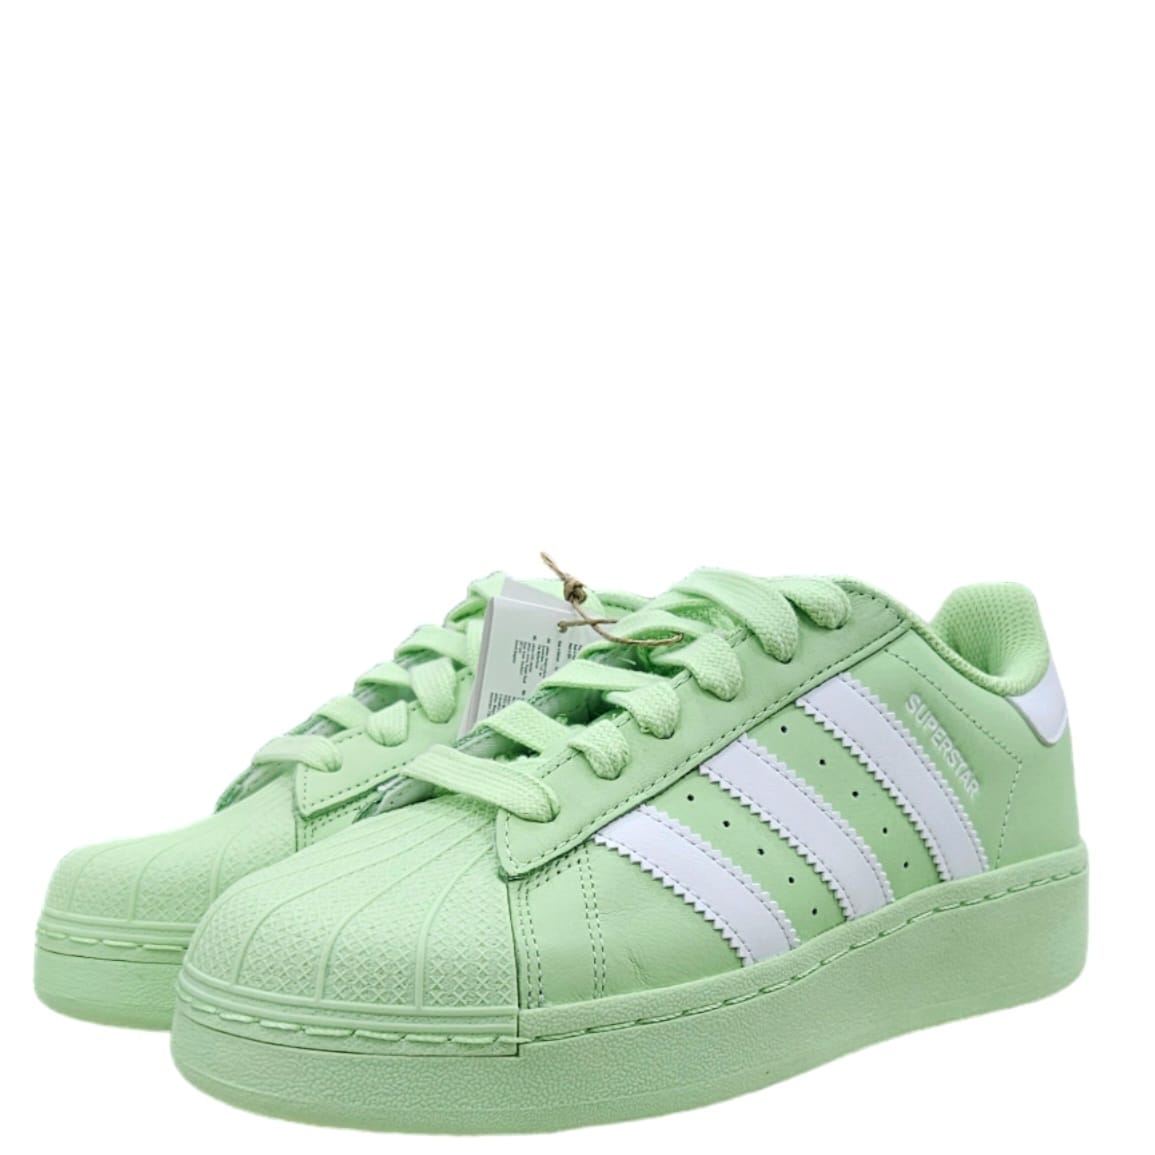 SNEAKERS DONNA SUPERSTAR XLG W ID5729 adidas walkingon